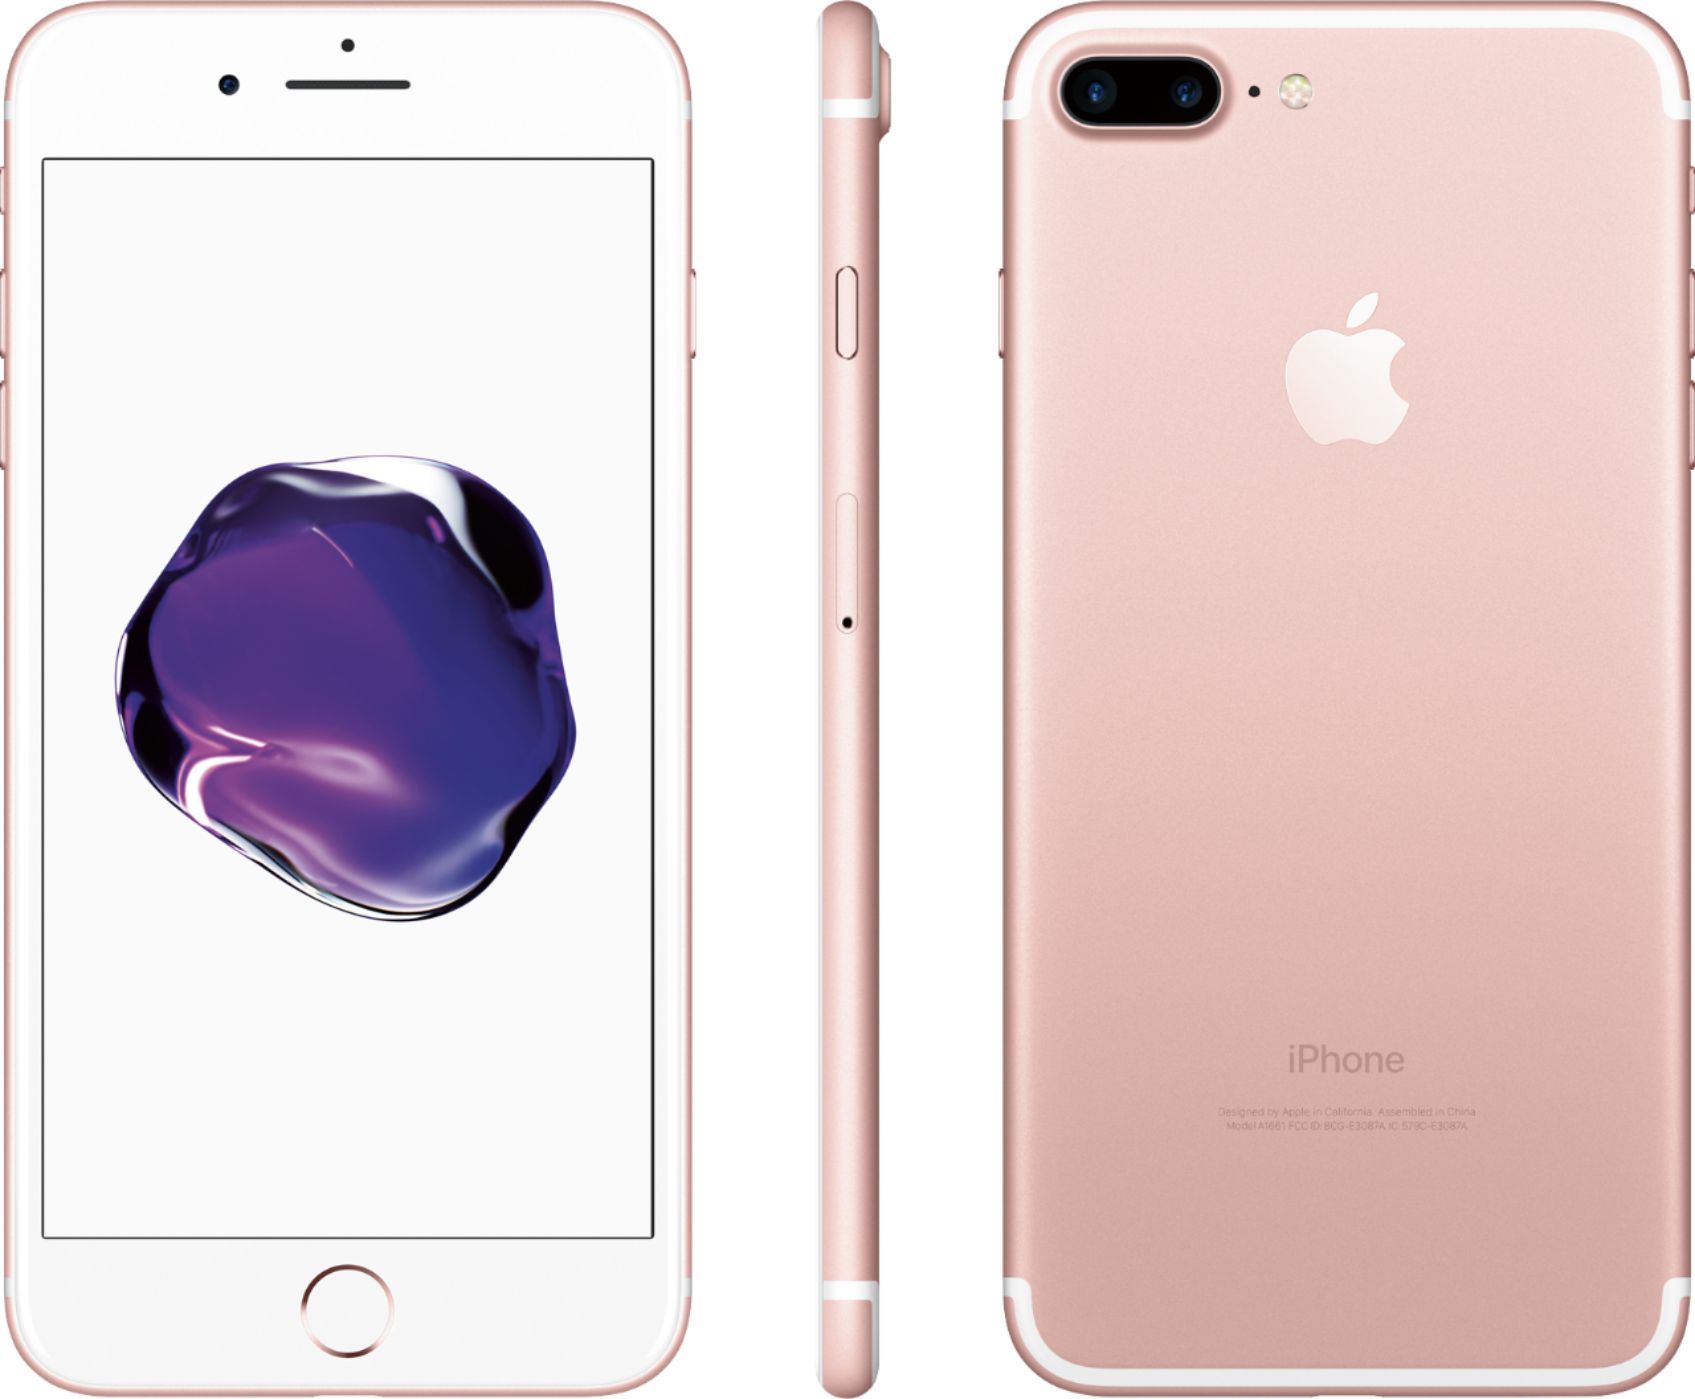 Best Buy Apple Iphone 7 Plus 32gb Rose Gold Sprint Mnql2ll A